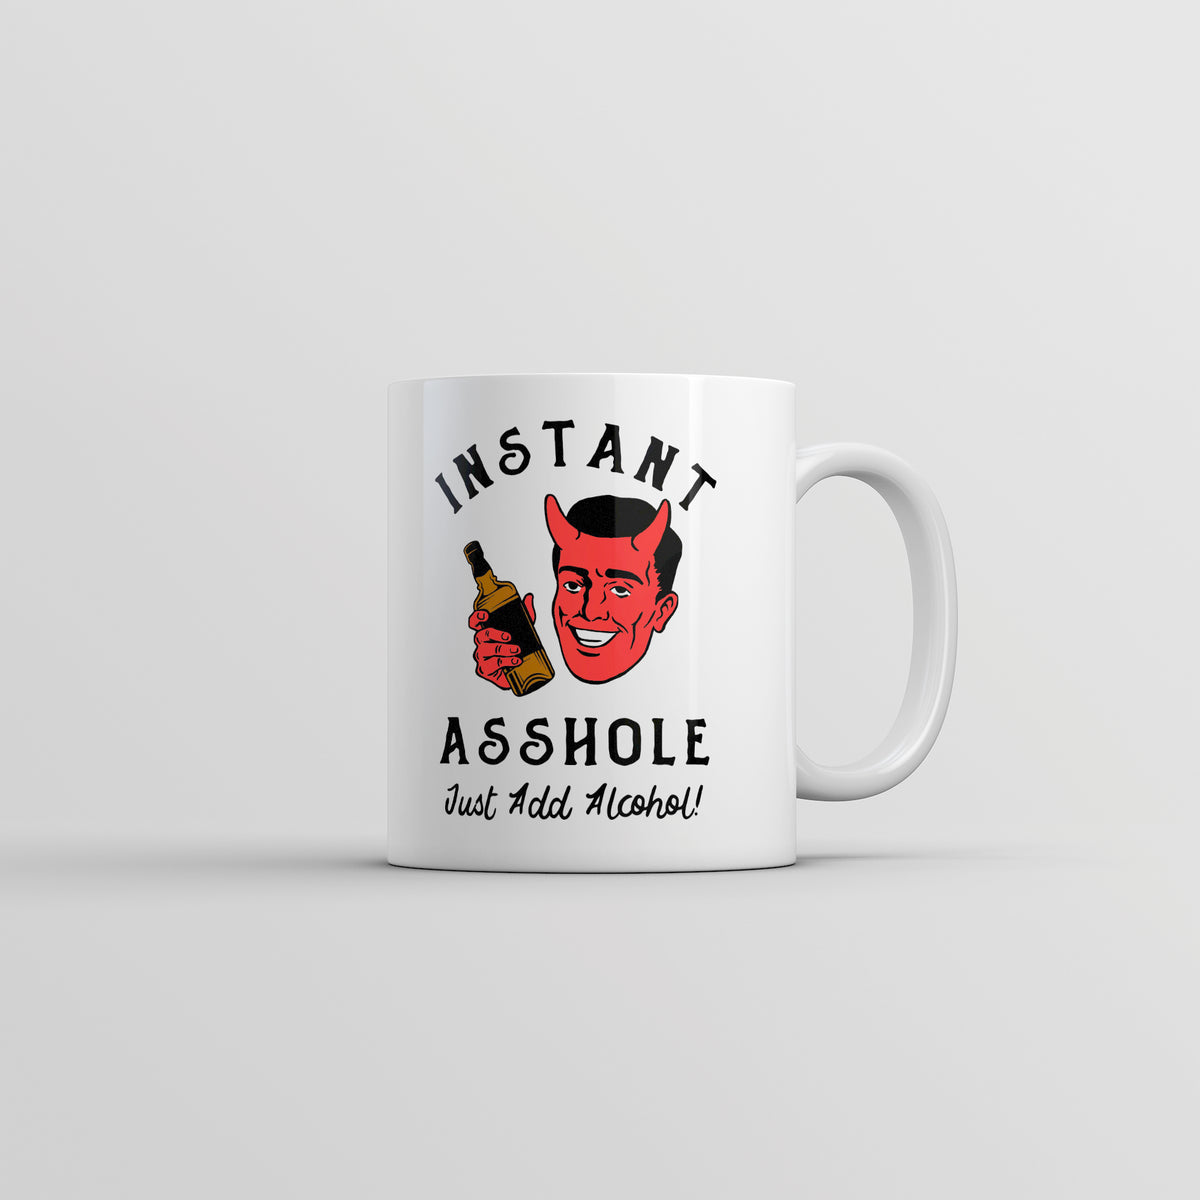 Funny White Instant Asshole Just Add Alcohol Coffee Mug Nerdy Drinking sarcastic Tee